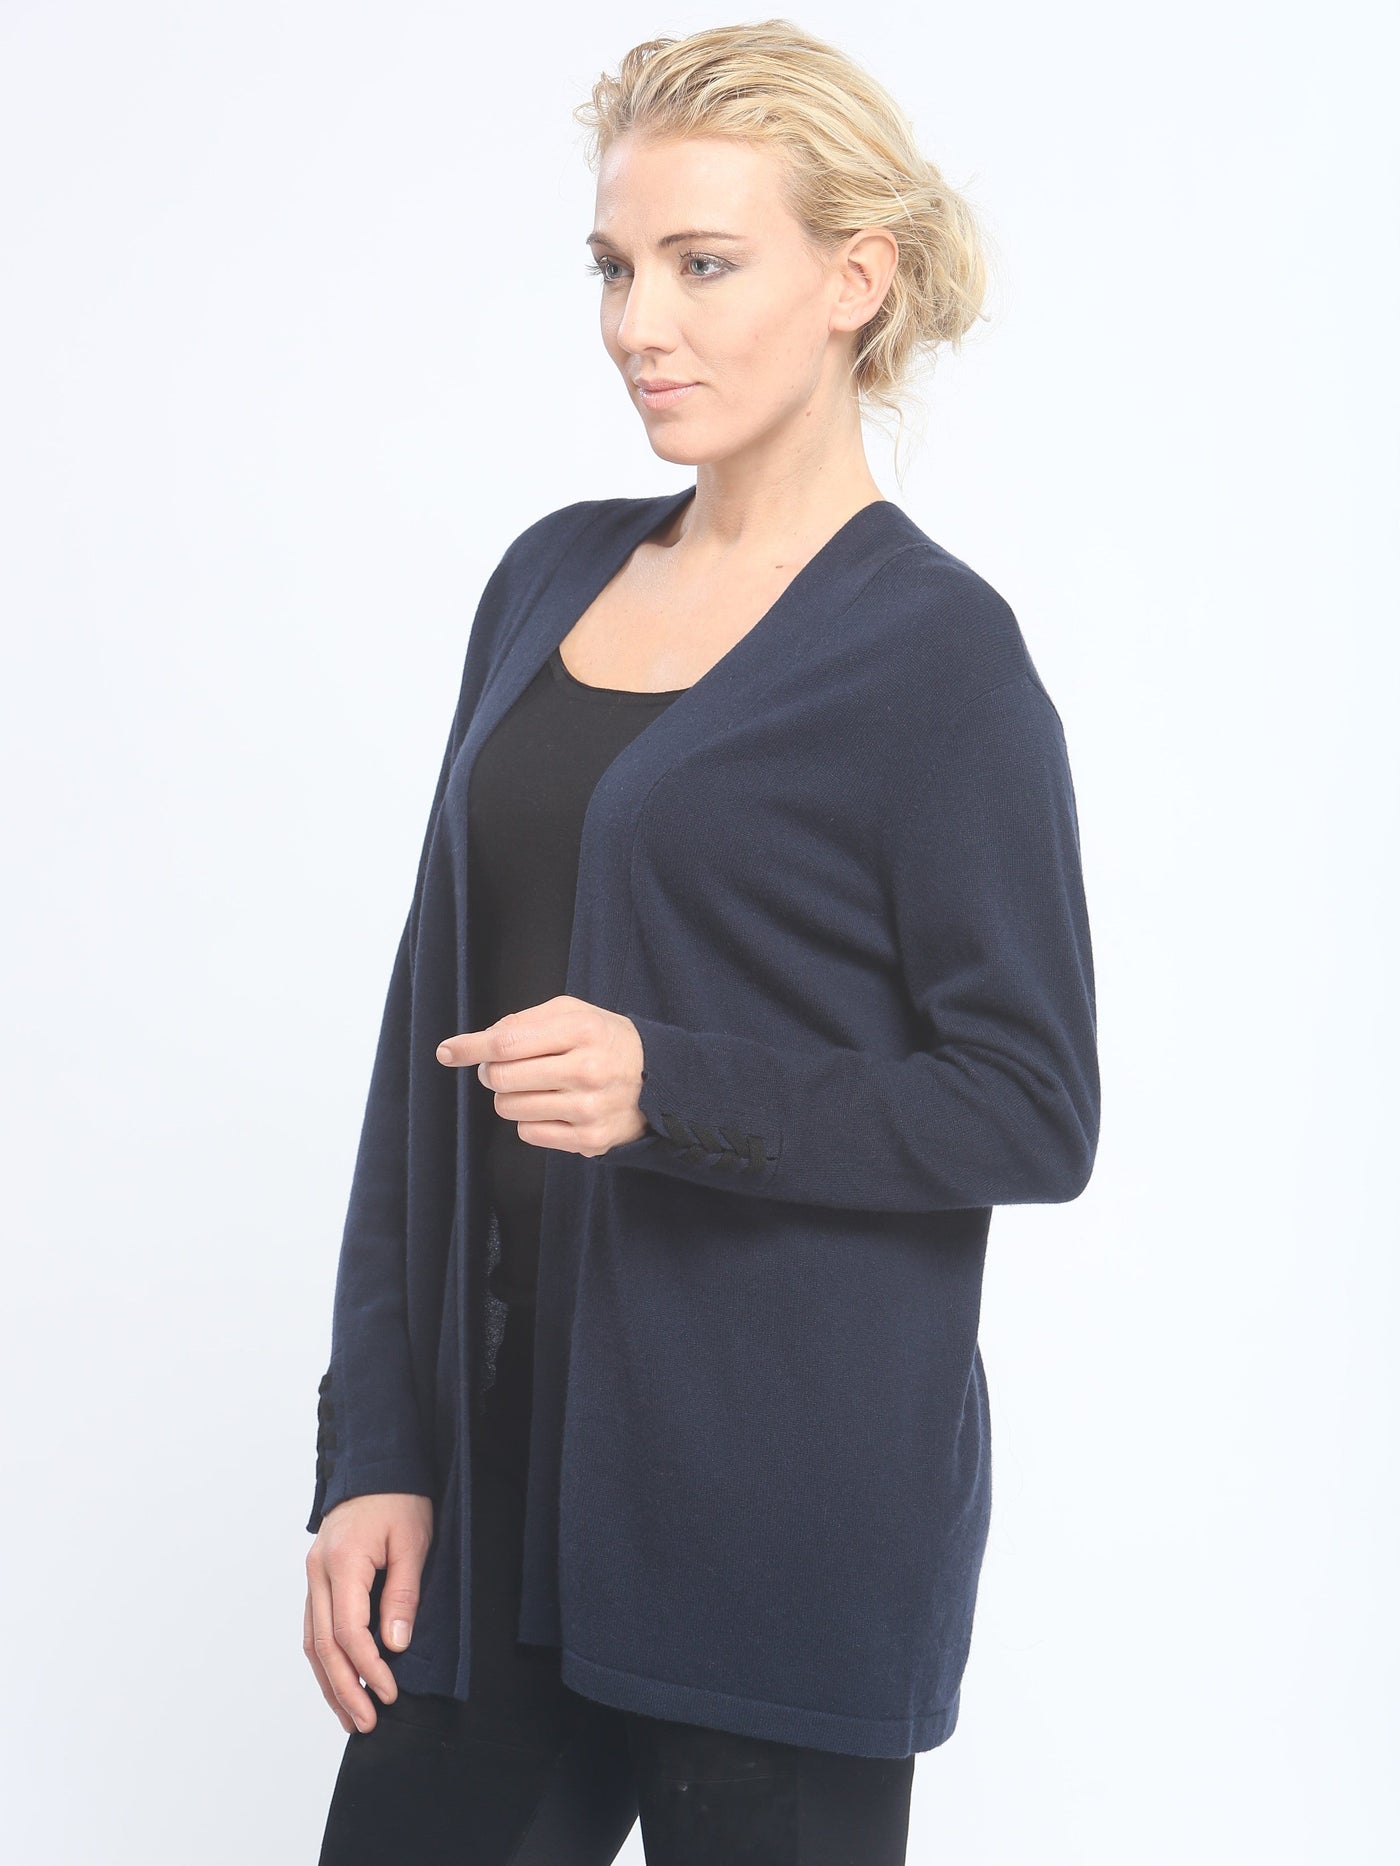 Lace Up Open Front Cardigan